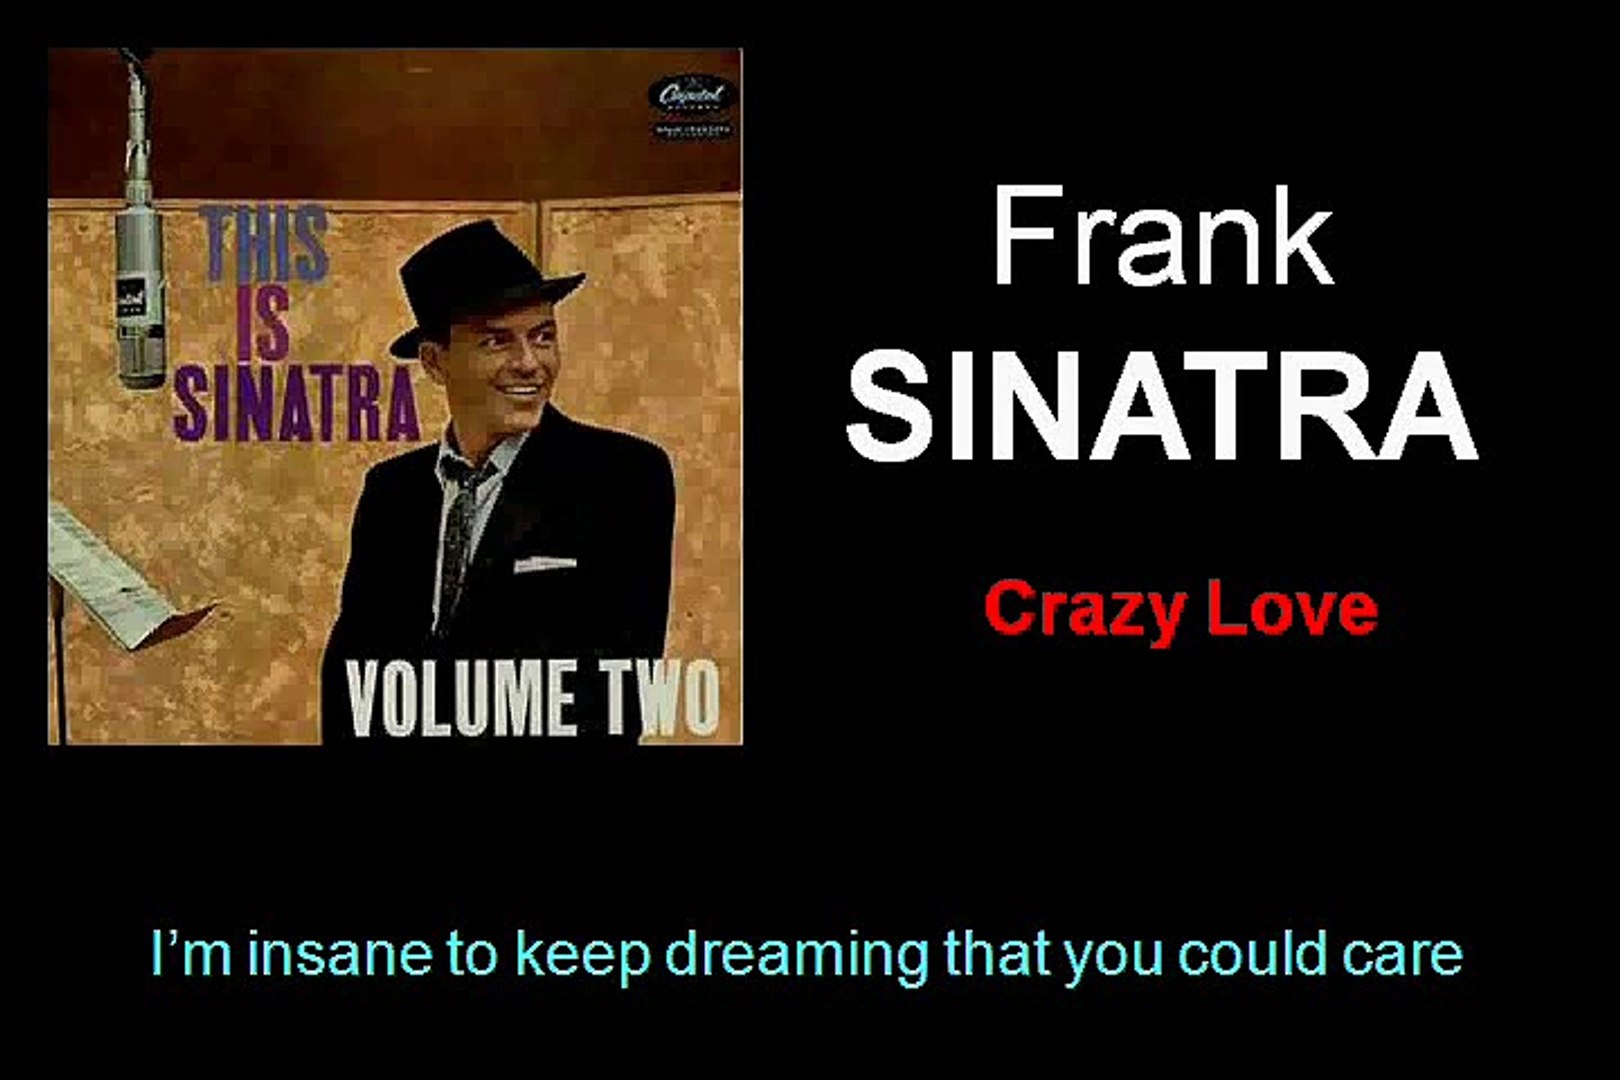 Frank Sinatra - Hey! Jealous lover. Frank Sinatra - put your Dreams away. It might as well be Swing Фрэнк Синатра. Hey Hey Hey lover текст. Фрэнк синатра love me